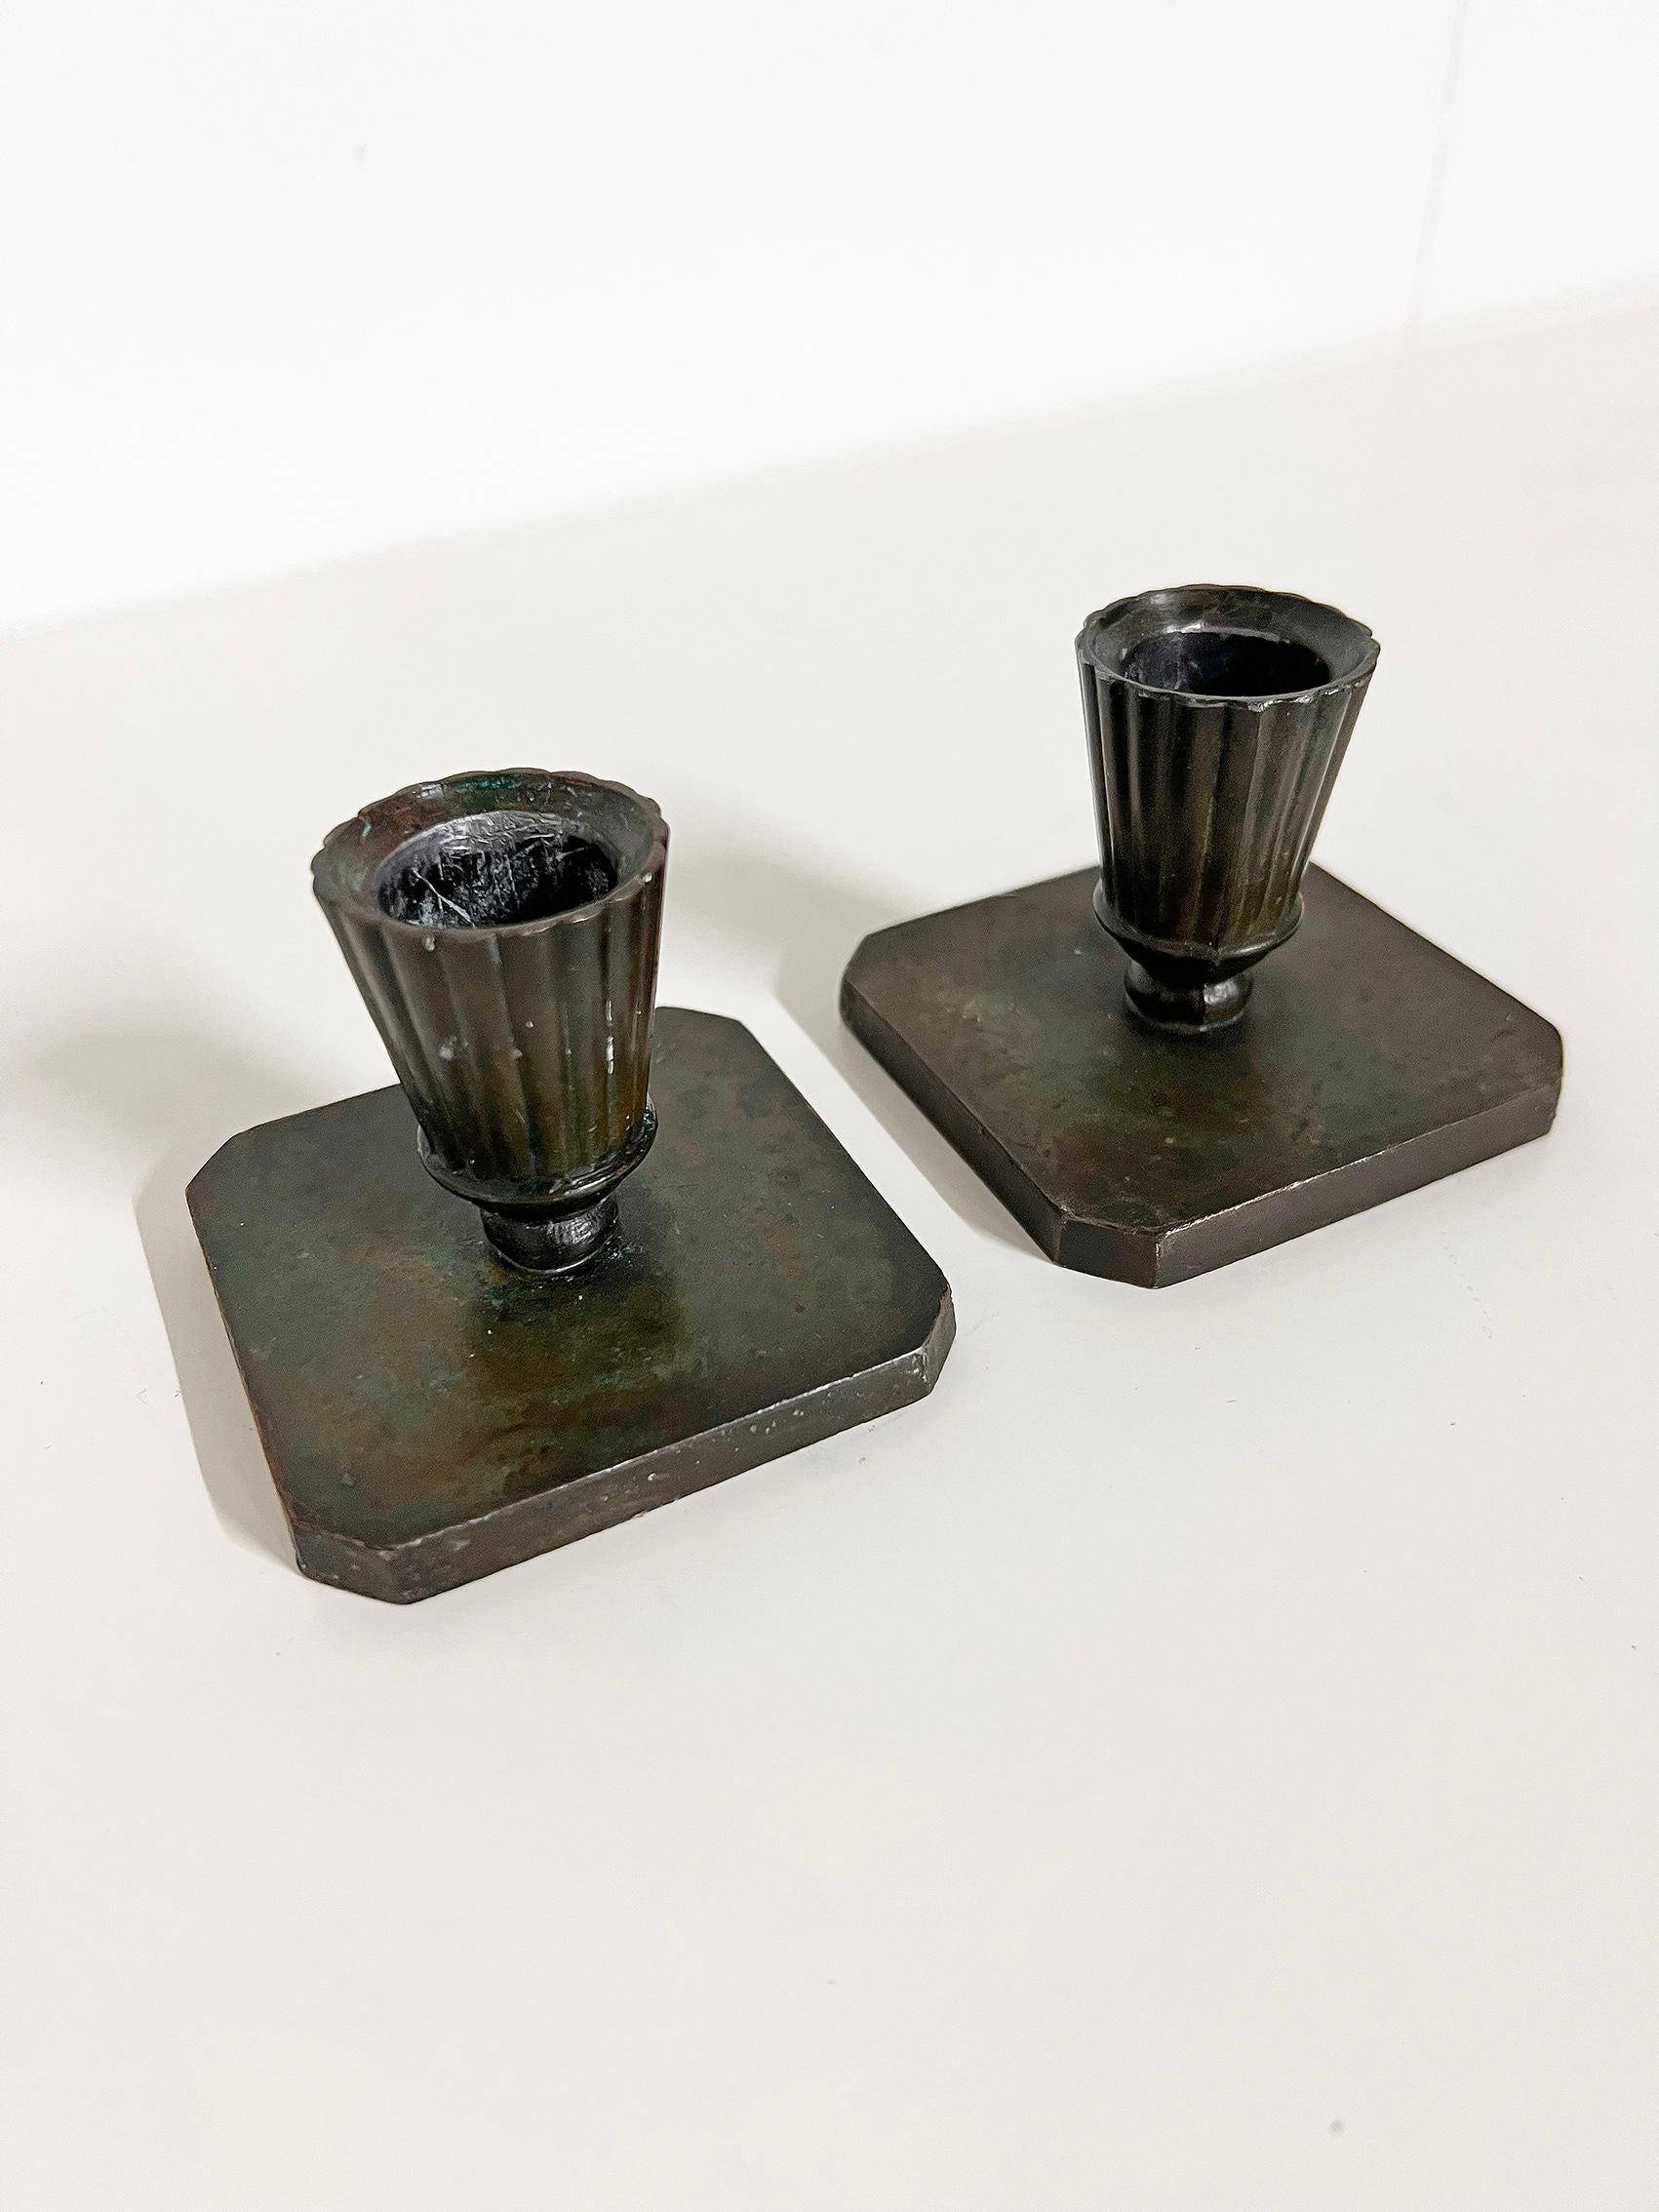 Mid-20th Century Scandinavian Modern Pair of Candle Holders In Bronze ca 1930-40's For Sale